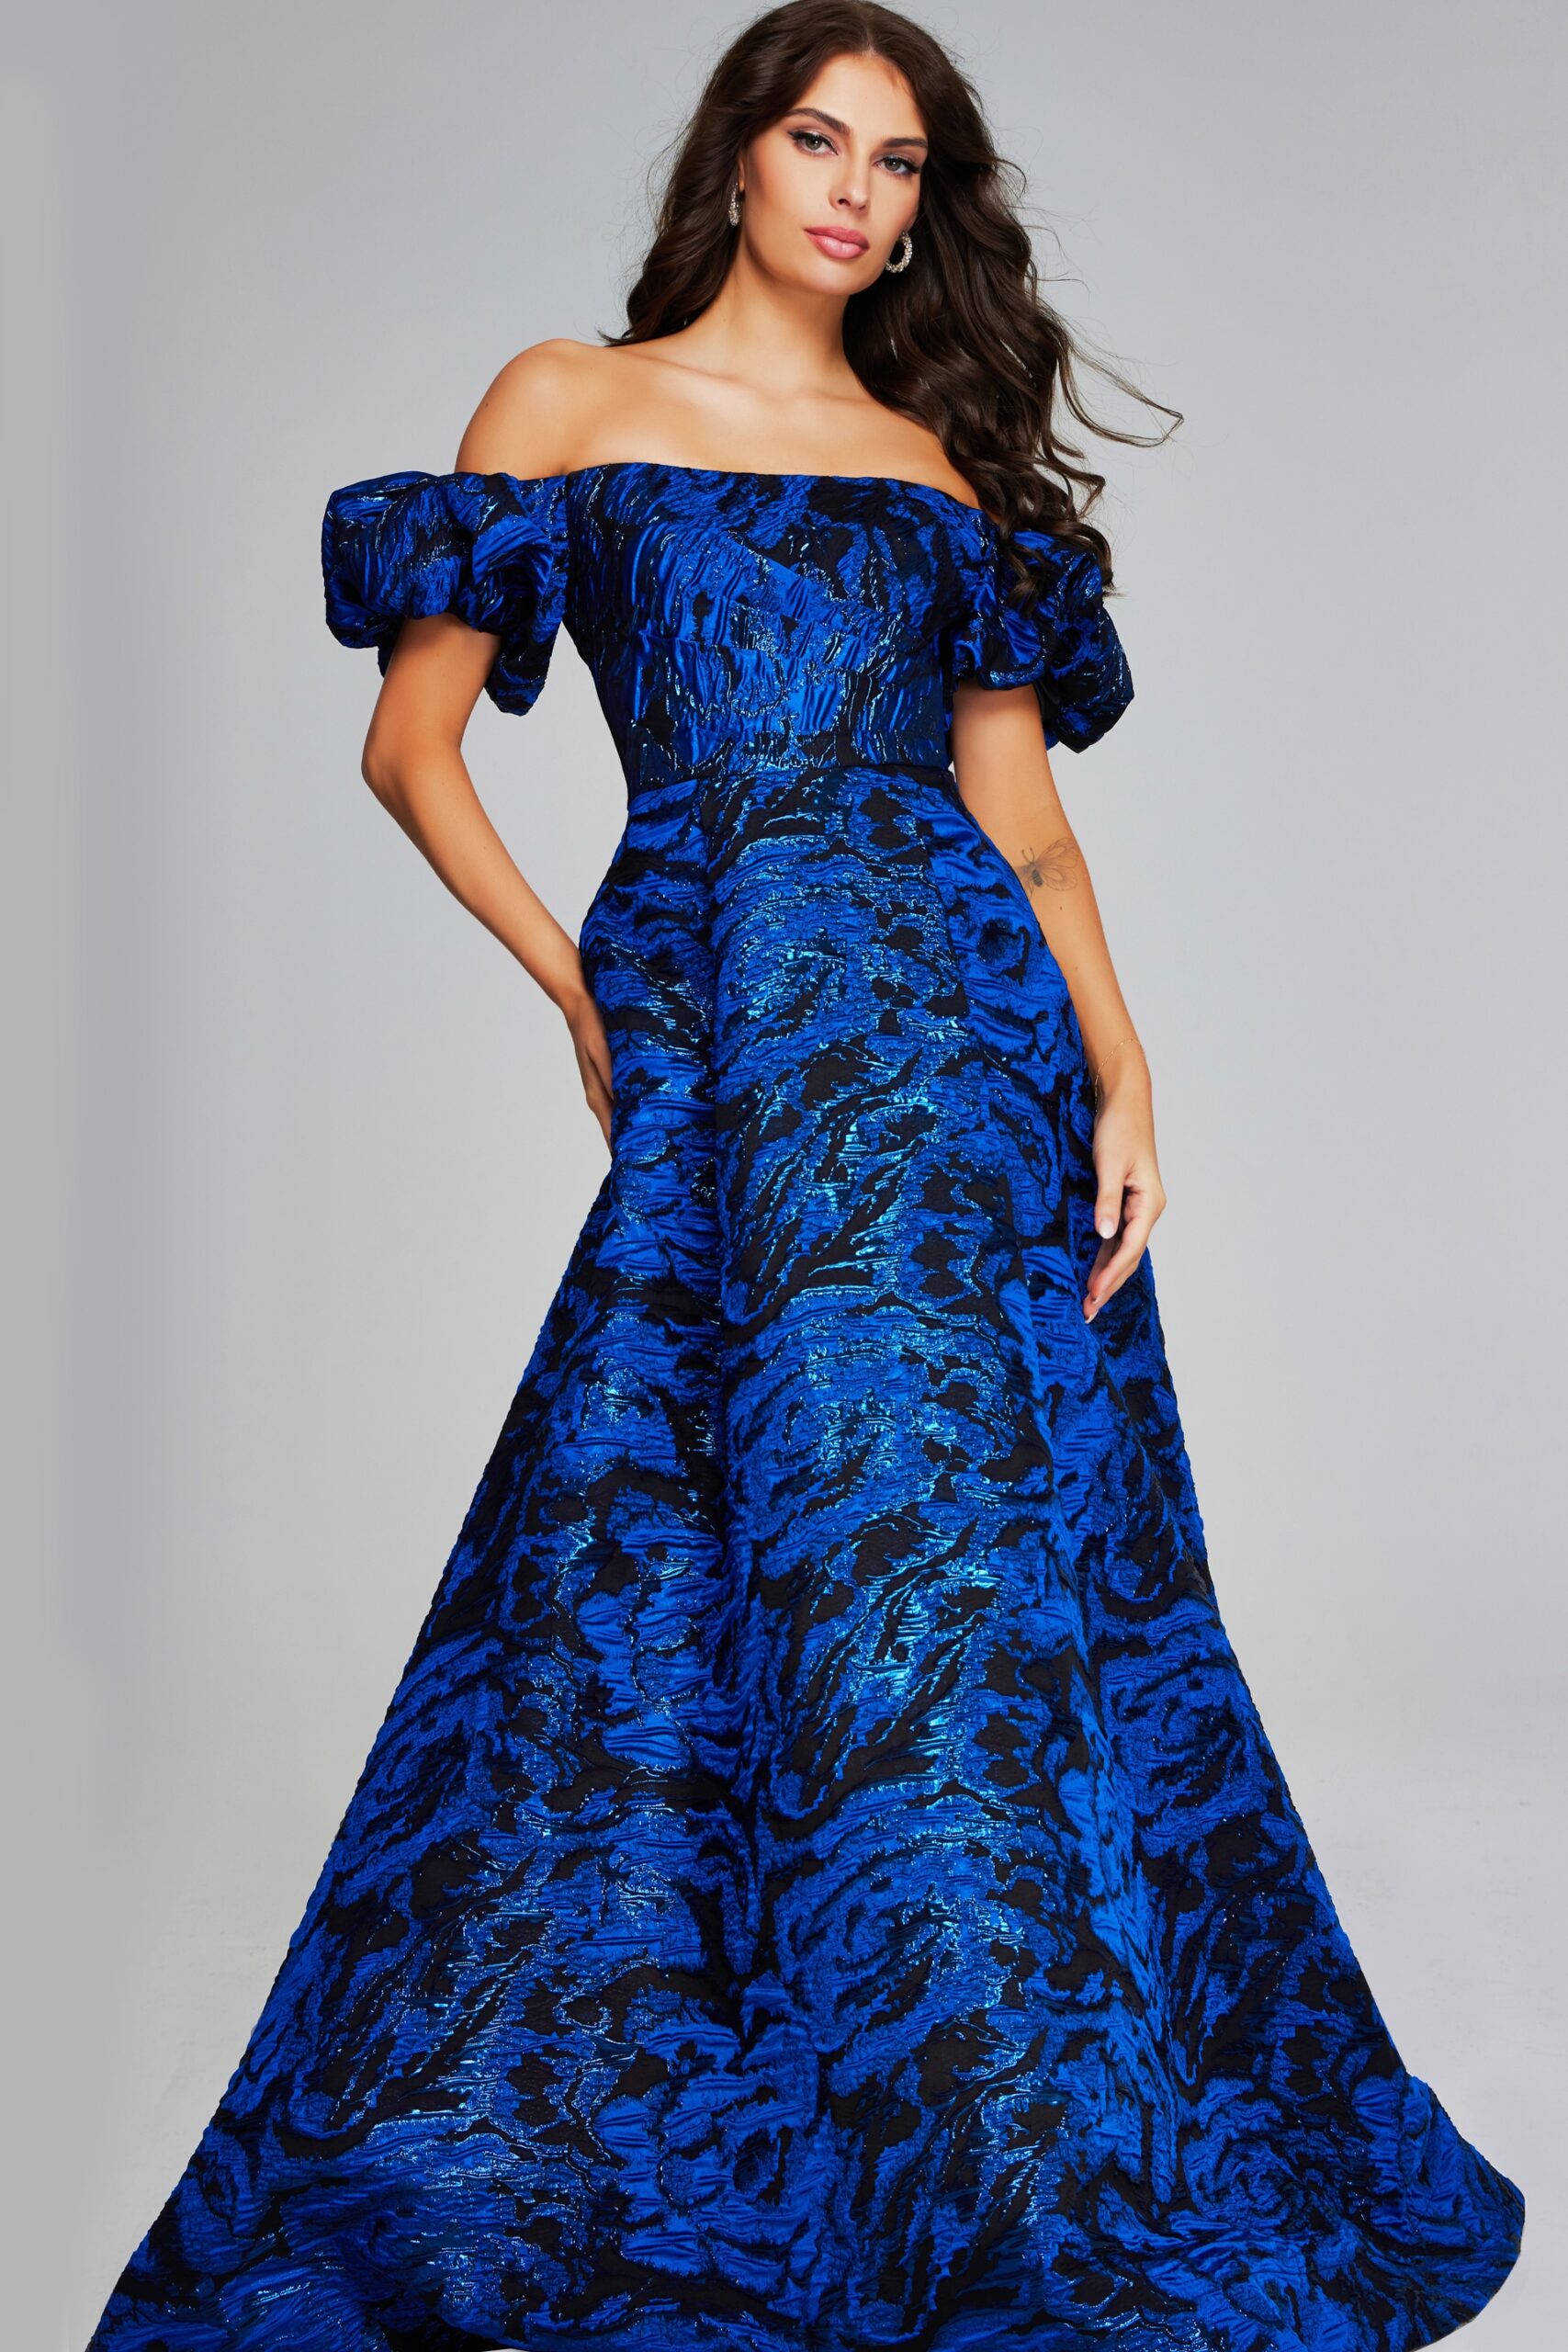 Model wearing Striking Royal Blue and Black Off-Shoulder Gown with Puff Sleeves 40315